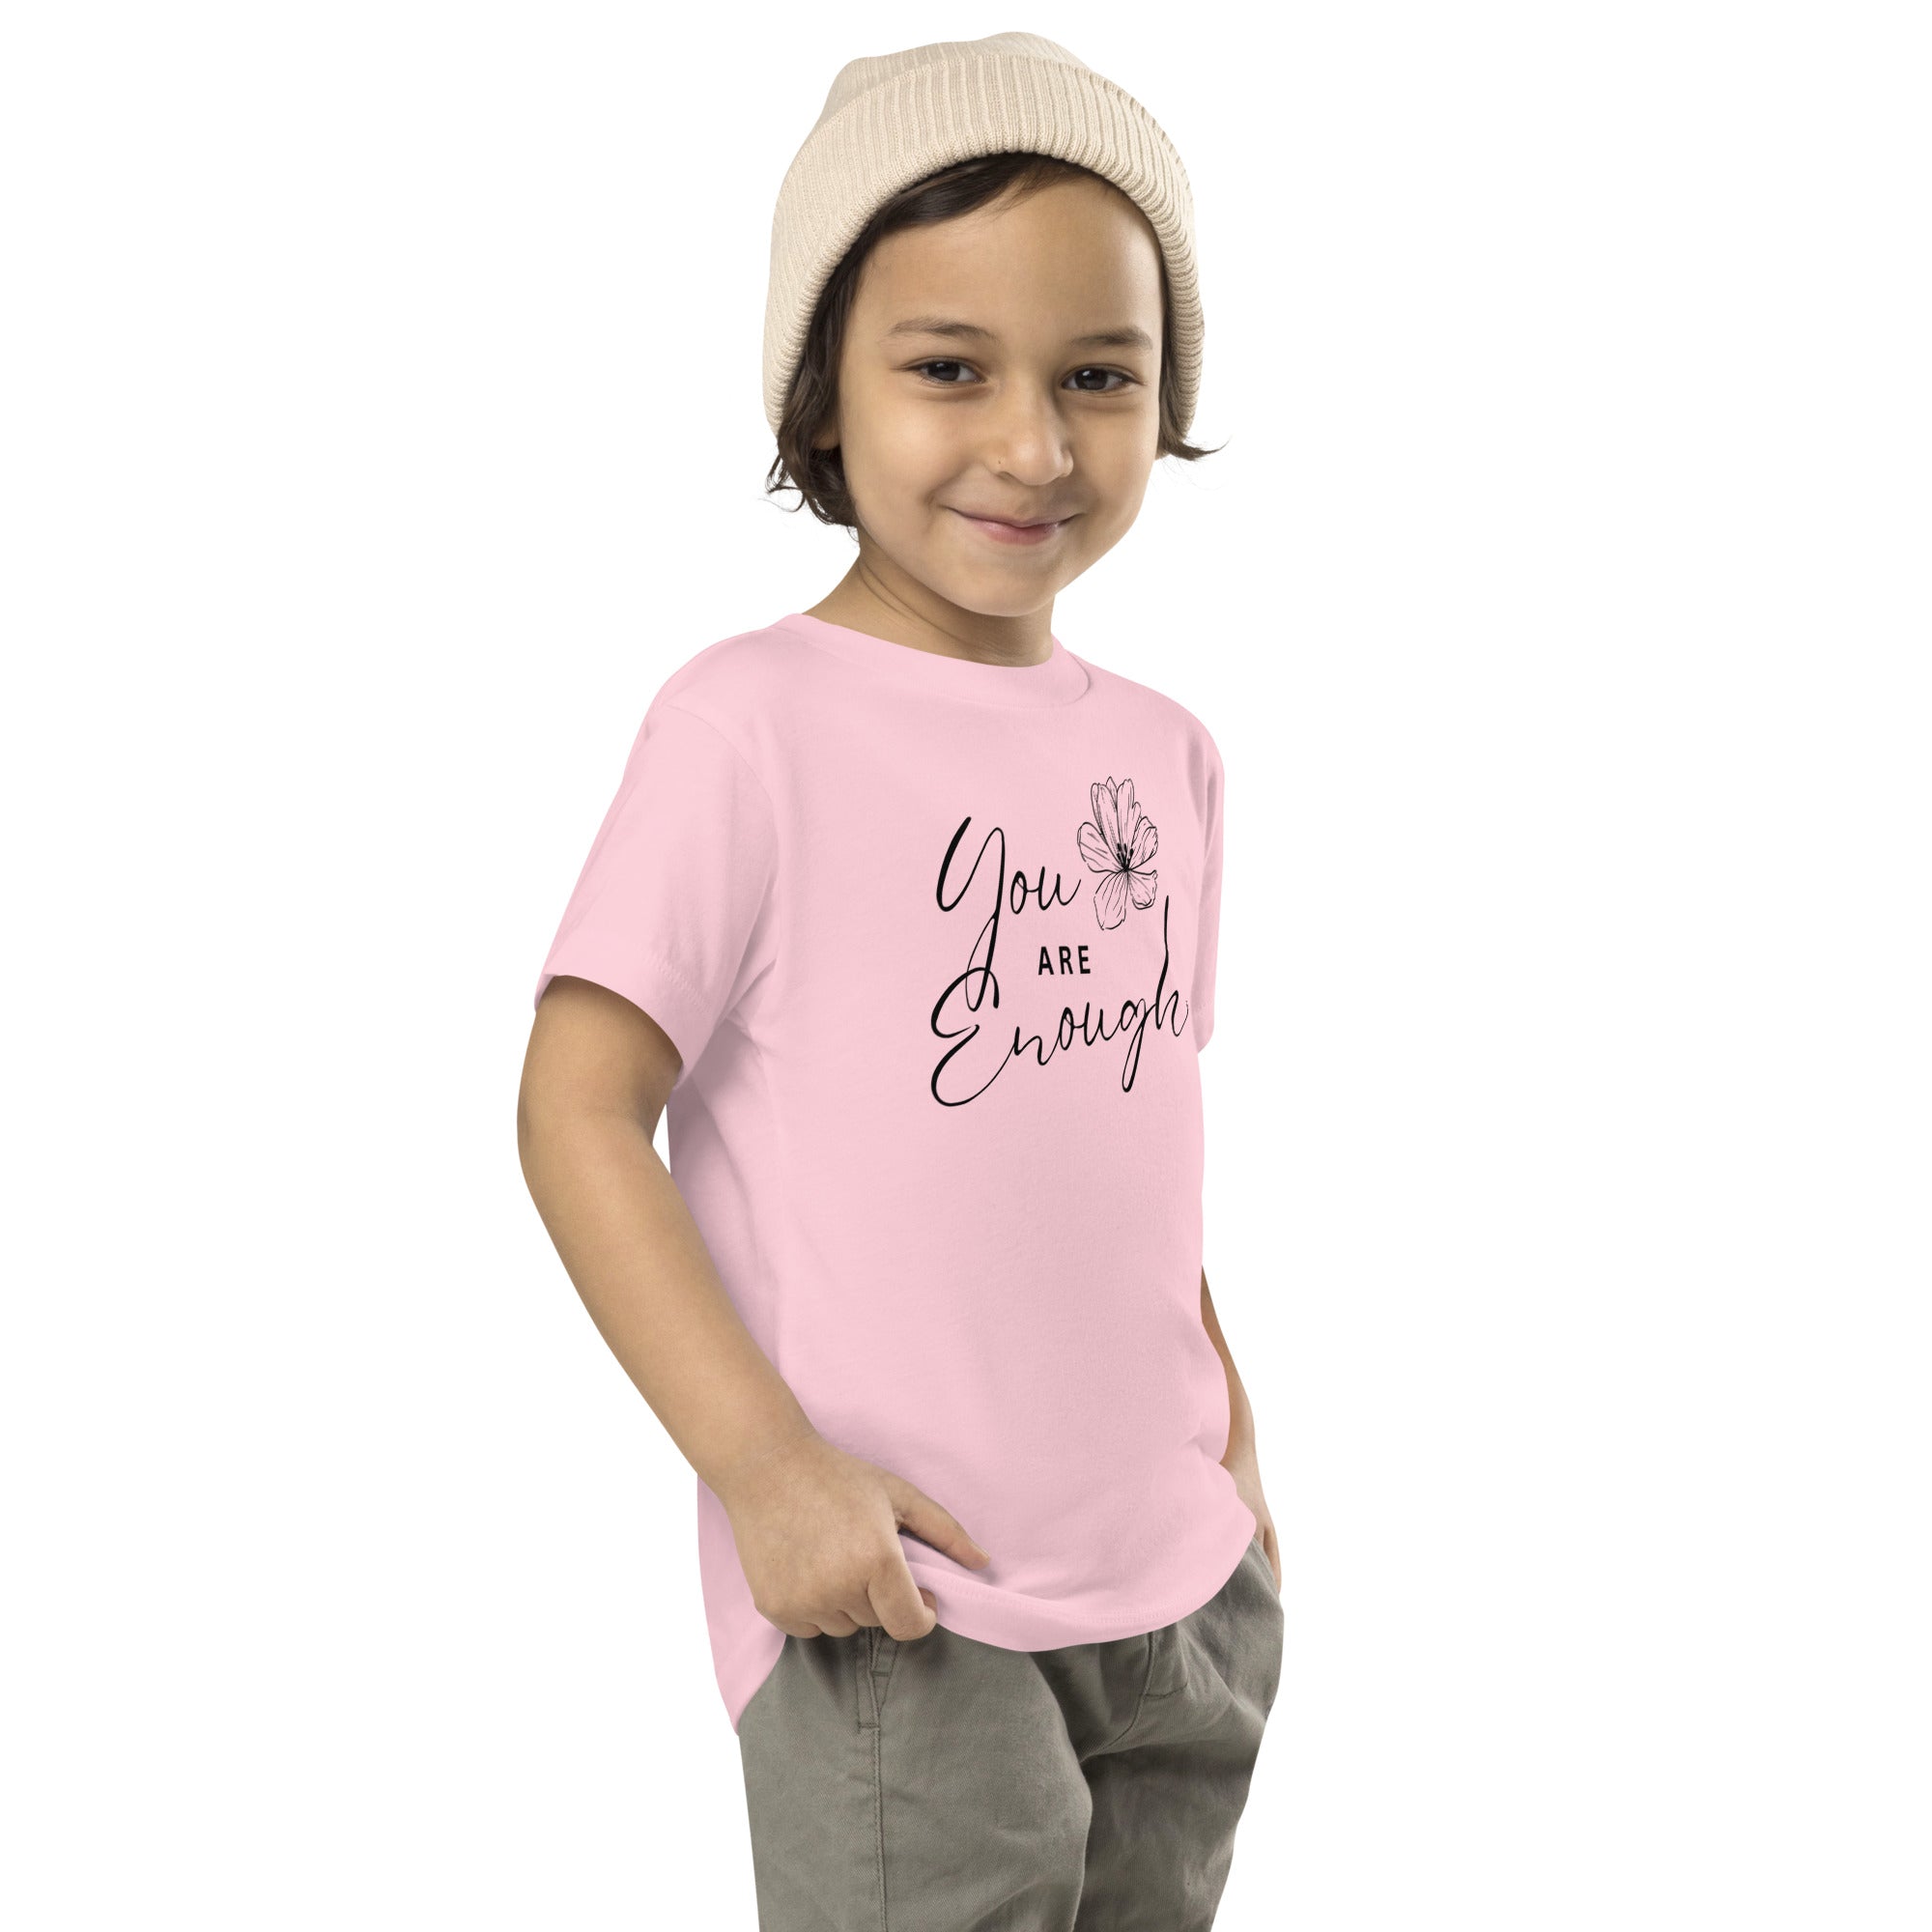 You Are Enough - Toddler Short Sleeve Tee